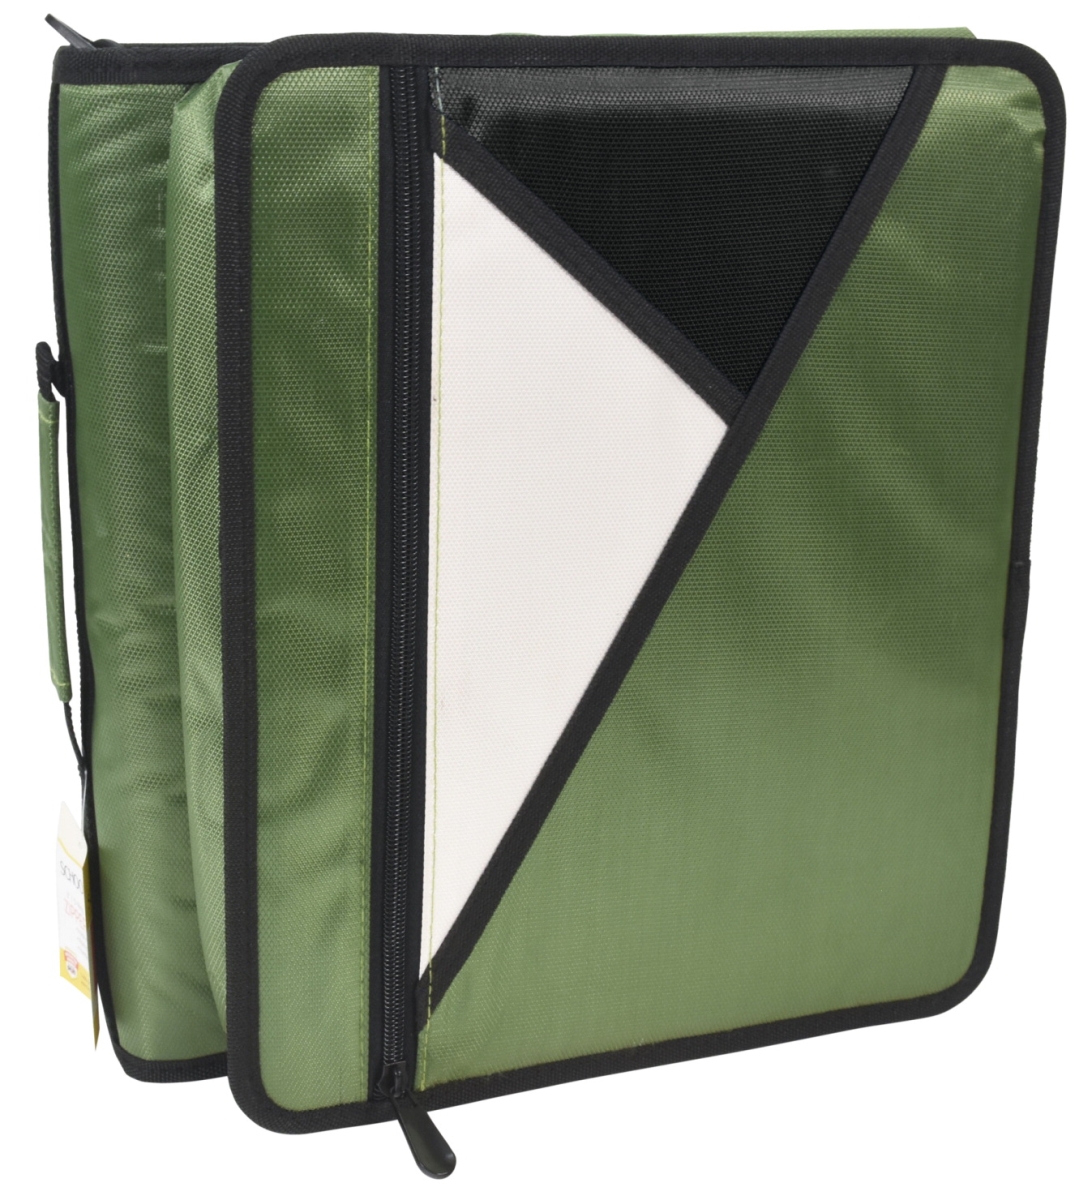 2019460 2 In. Round Ring Zipper Binder With Laptop Compartment, Green